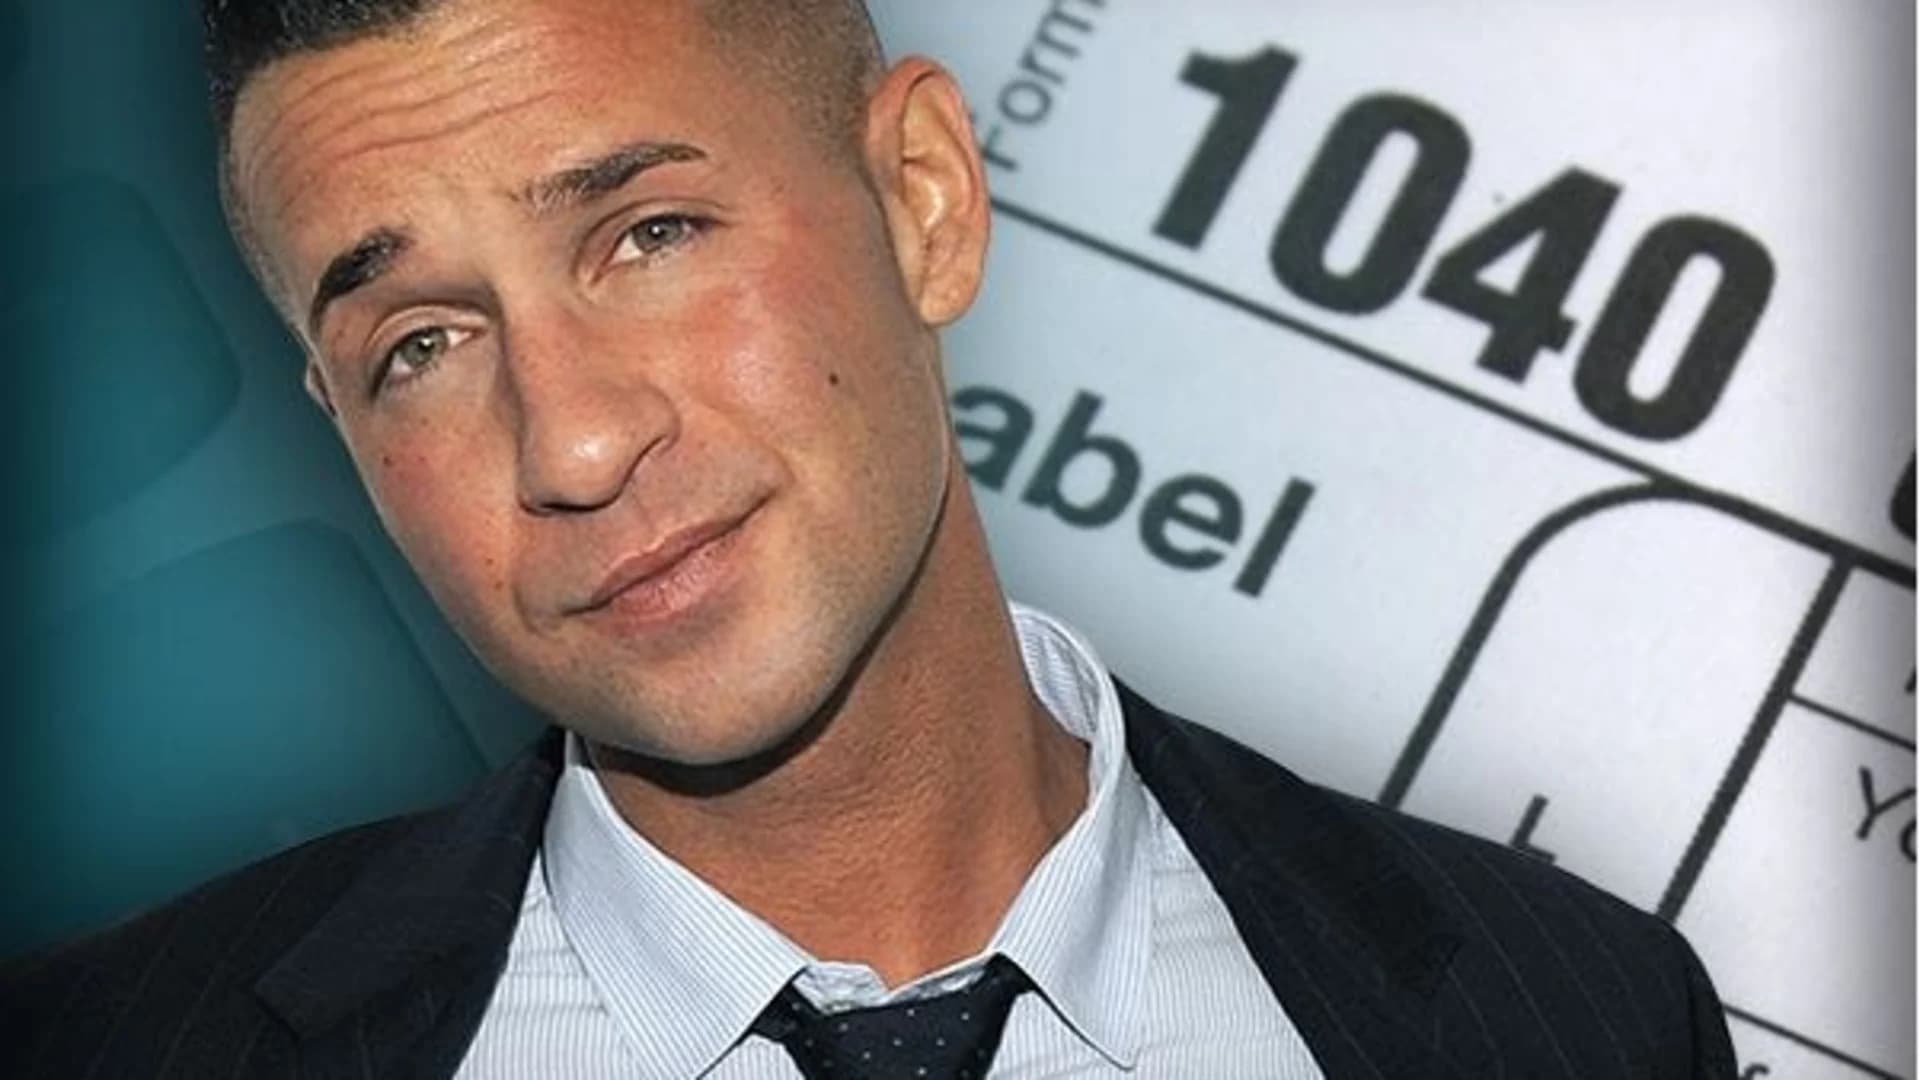 Mike ‘The Situation’ Sorrentino launches YouTube series about prison